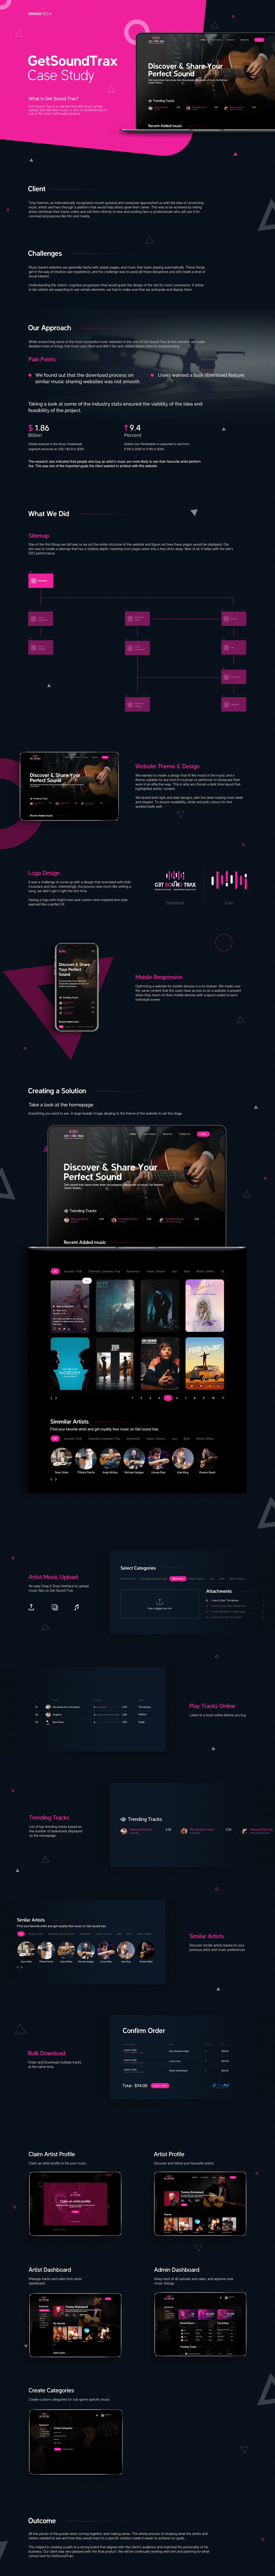 Music Website Case Study dashboard music landing page Marketplace OnDemand online marketplace royalty free soundtrack